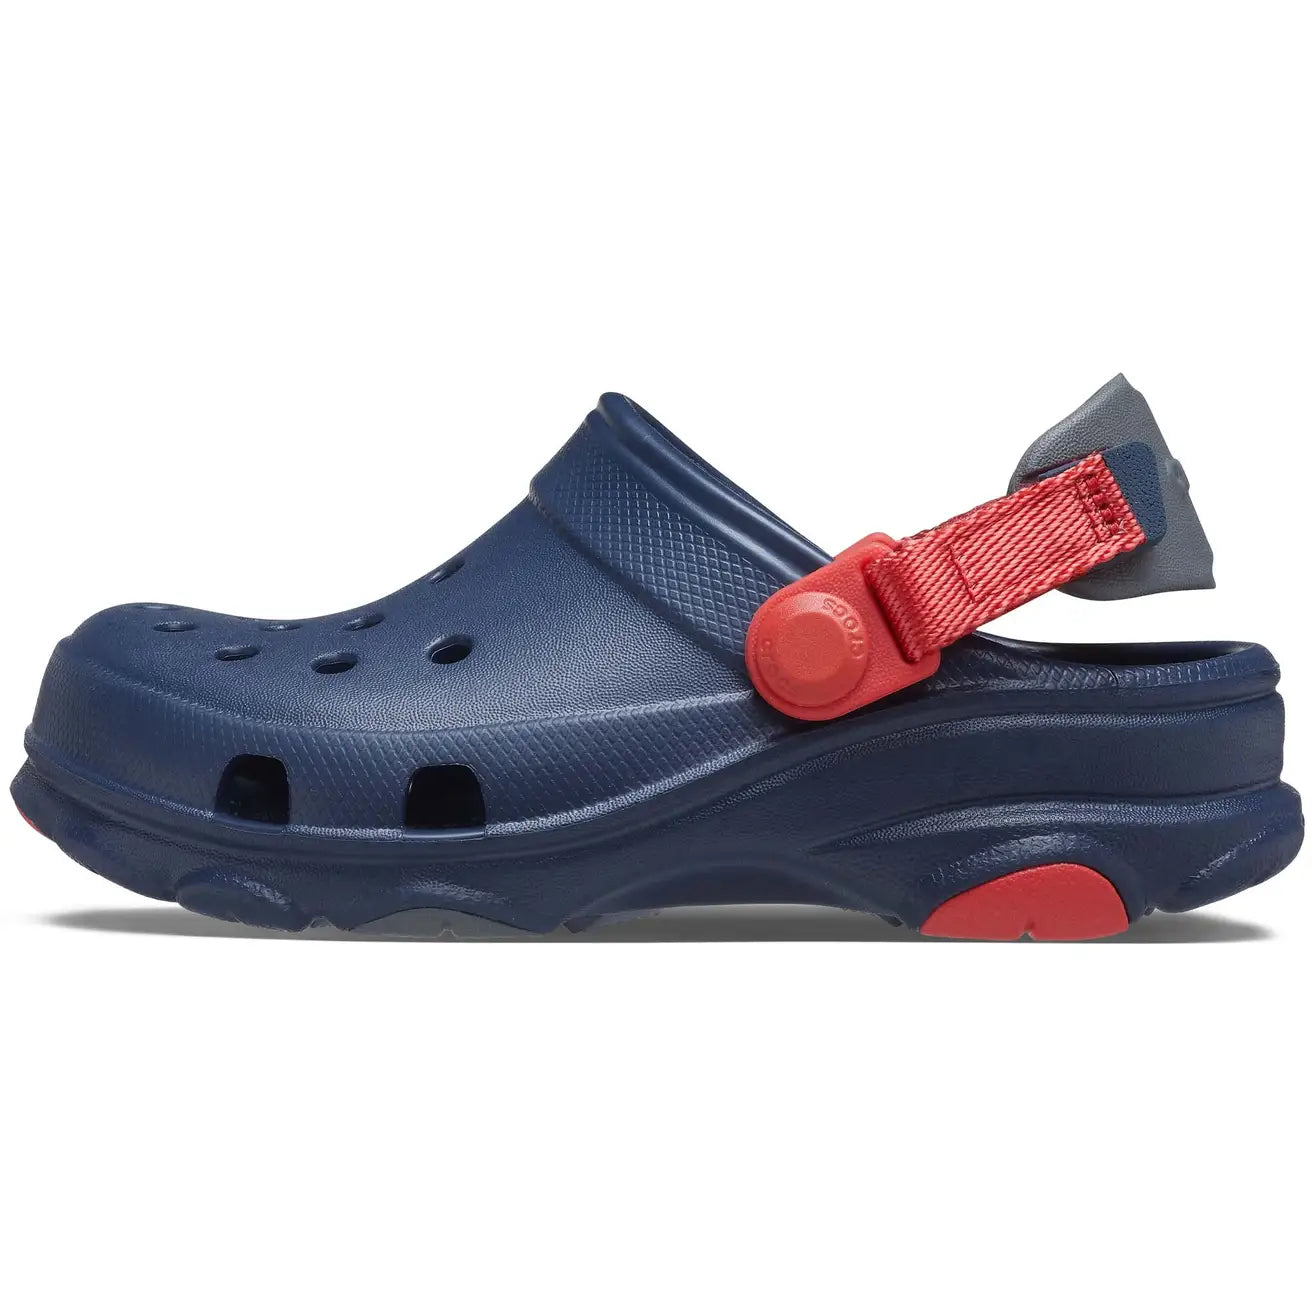 CR-Y7 (Crocs classic all terrain clog toddlers navy) 122393043